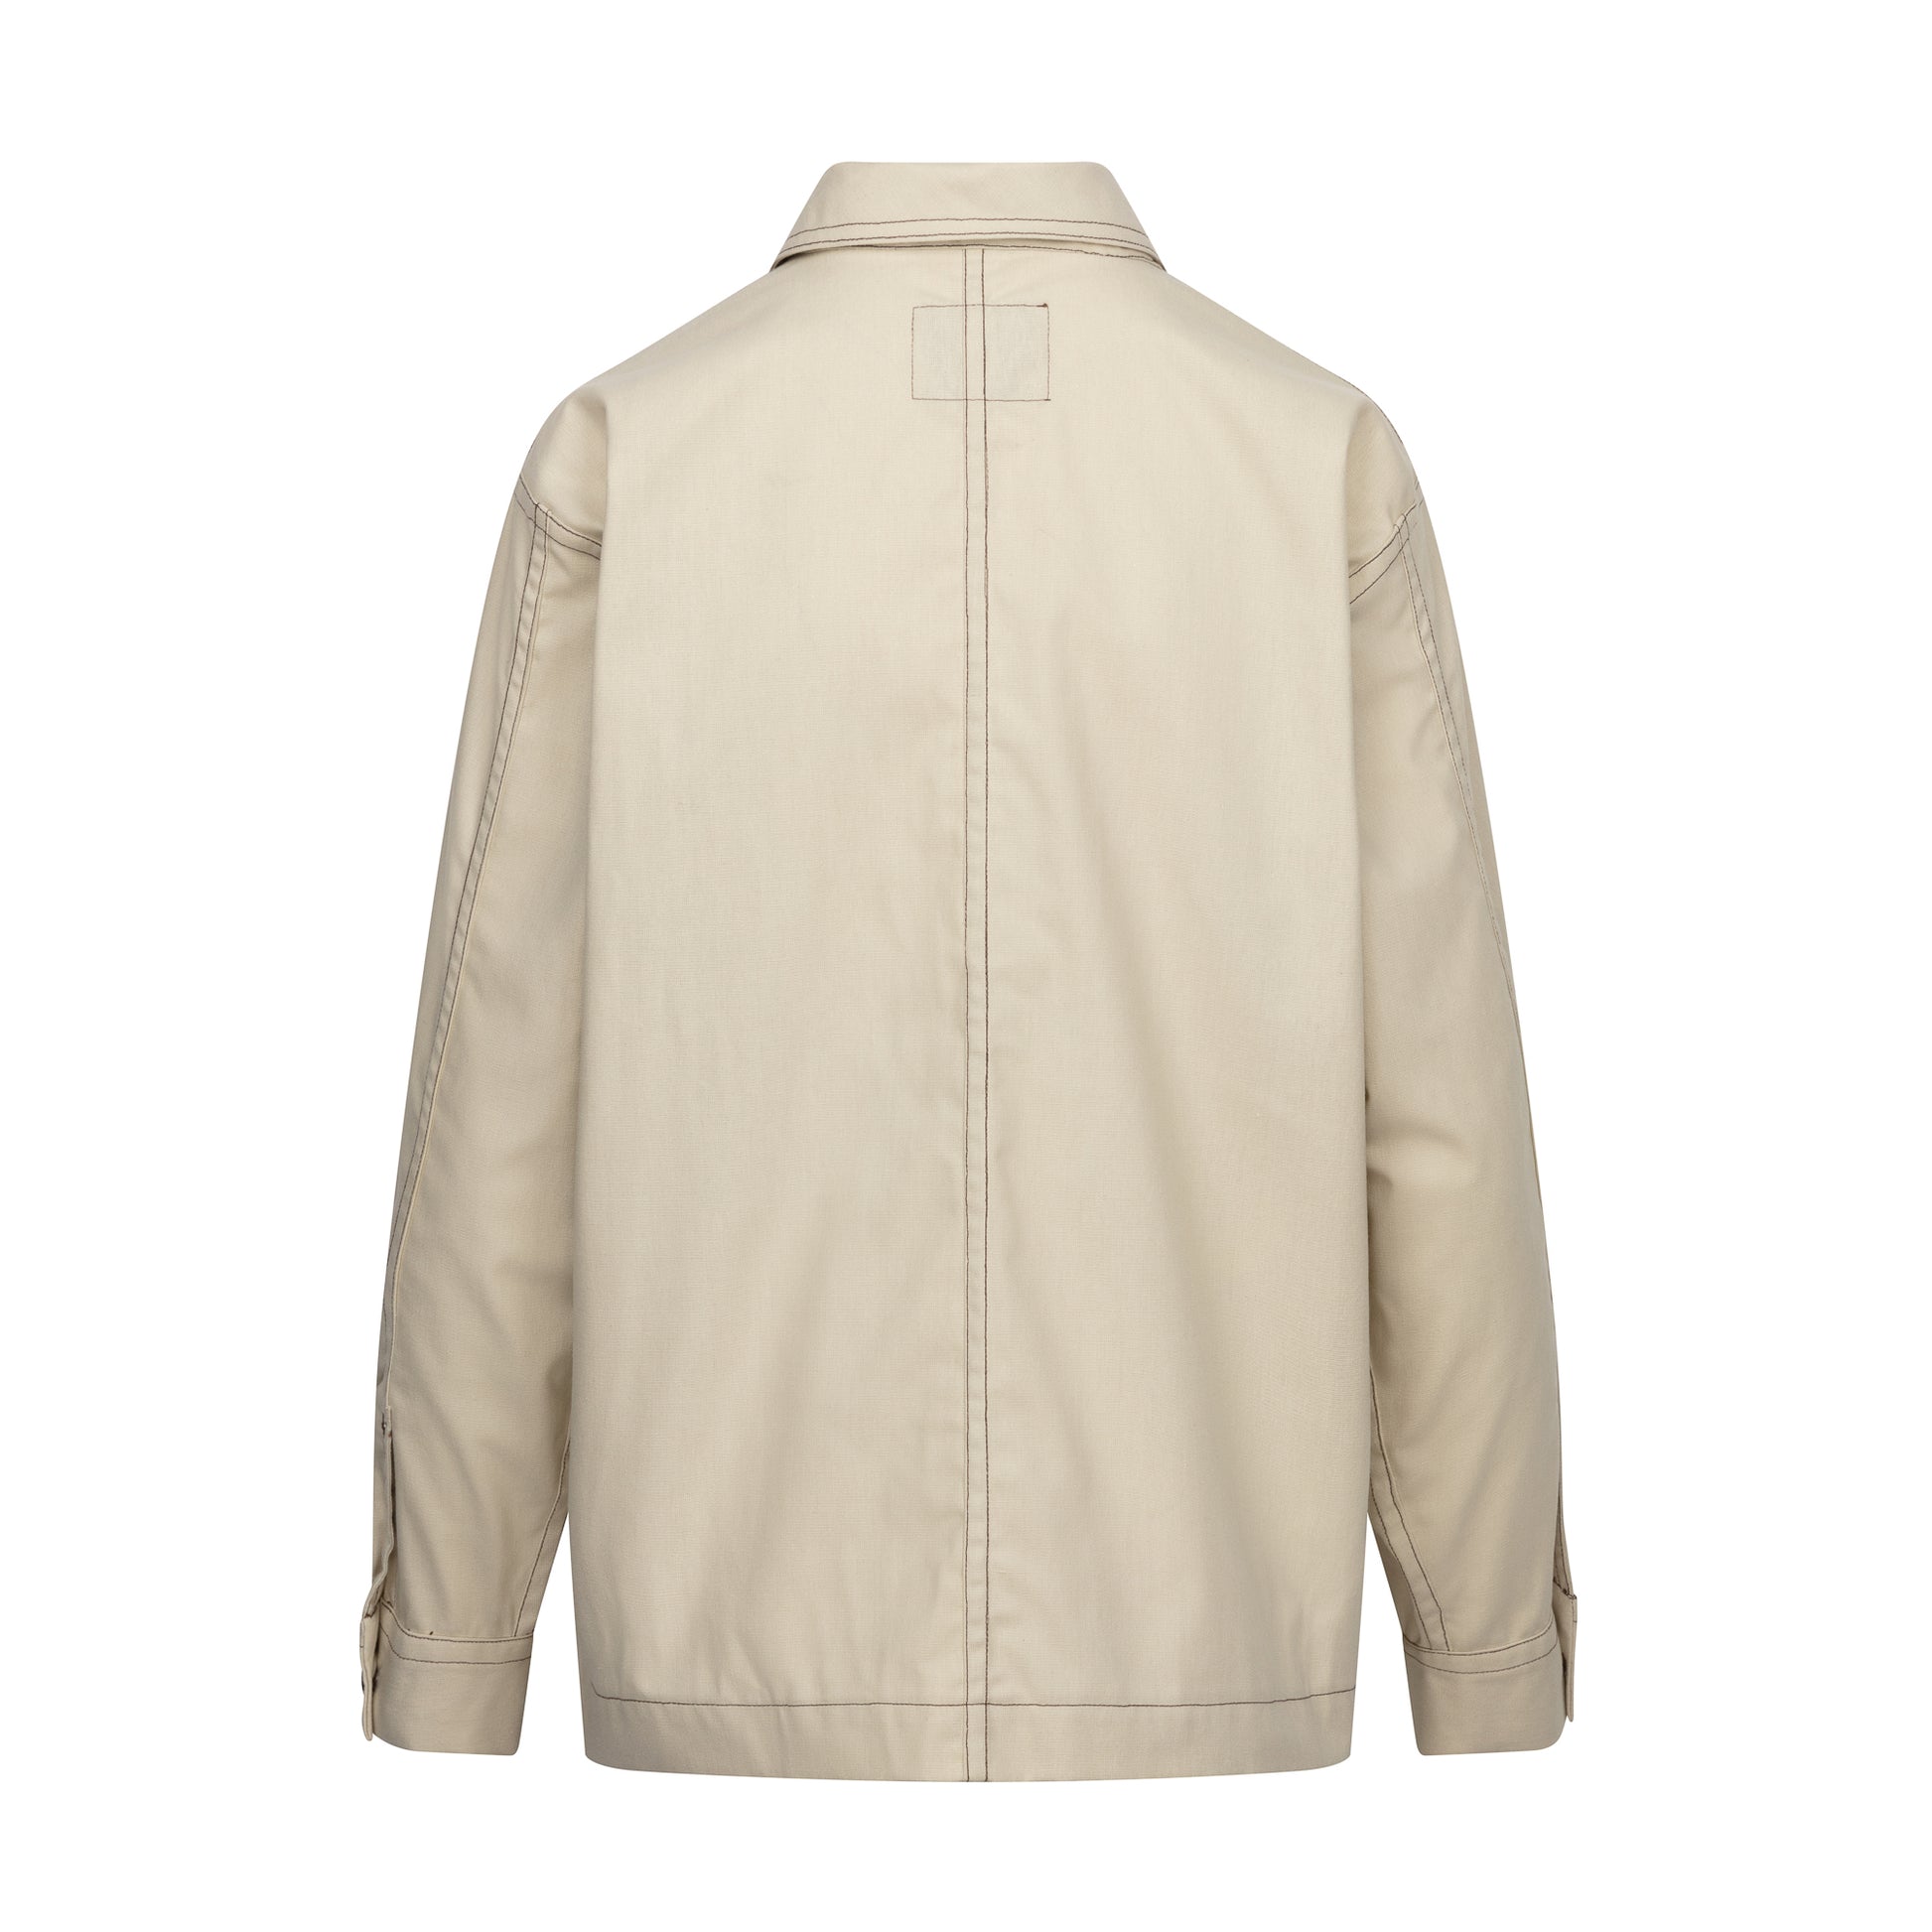 Sand Tailor Jacket - House of Bilimoria